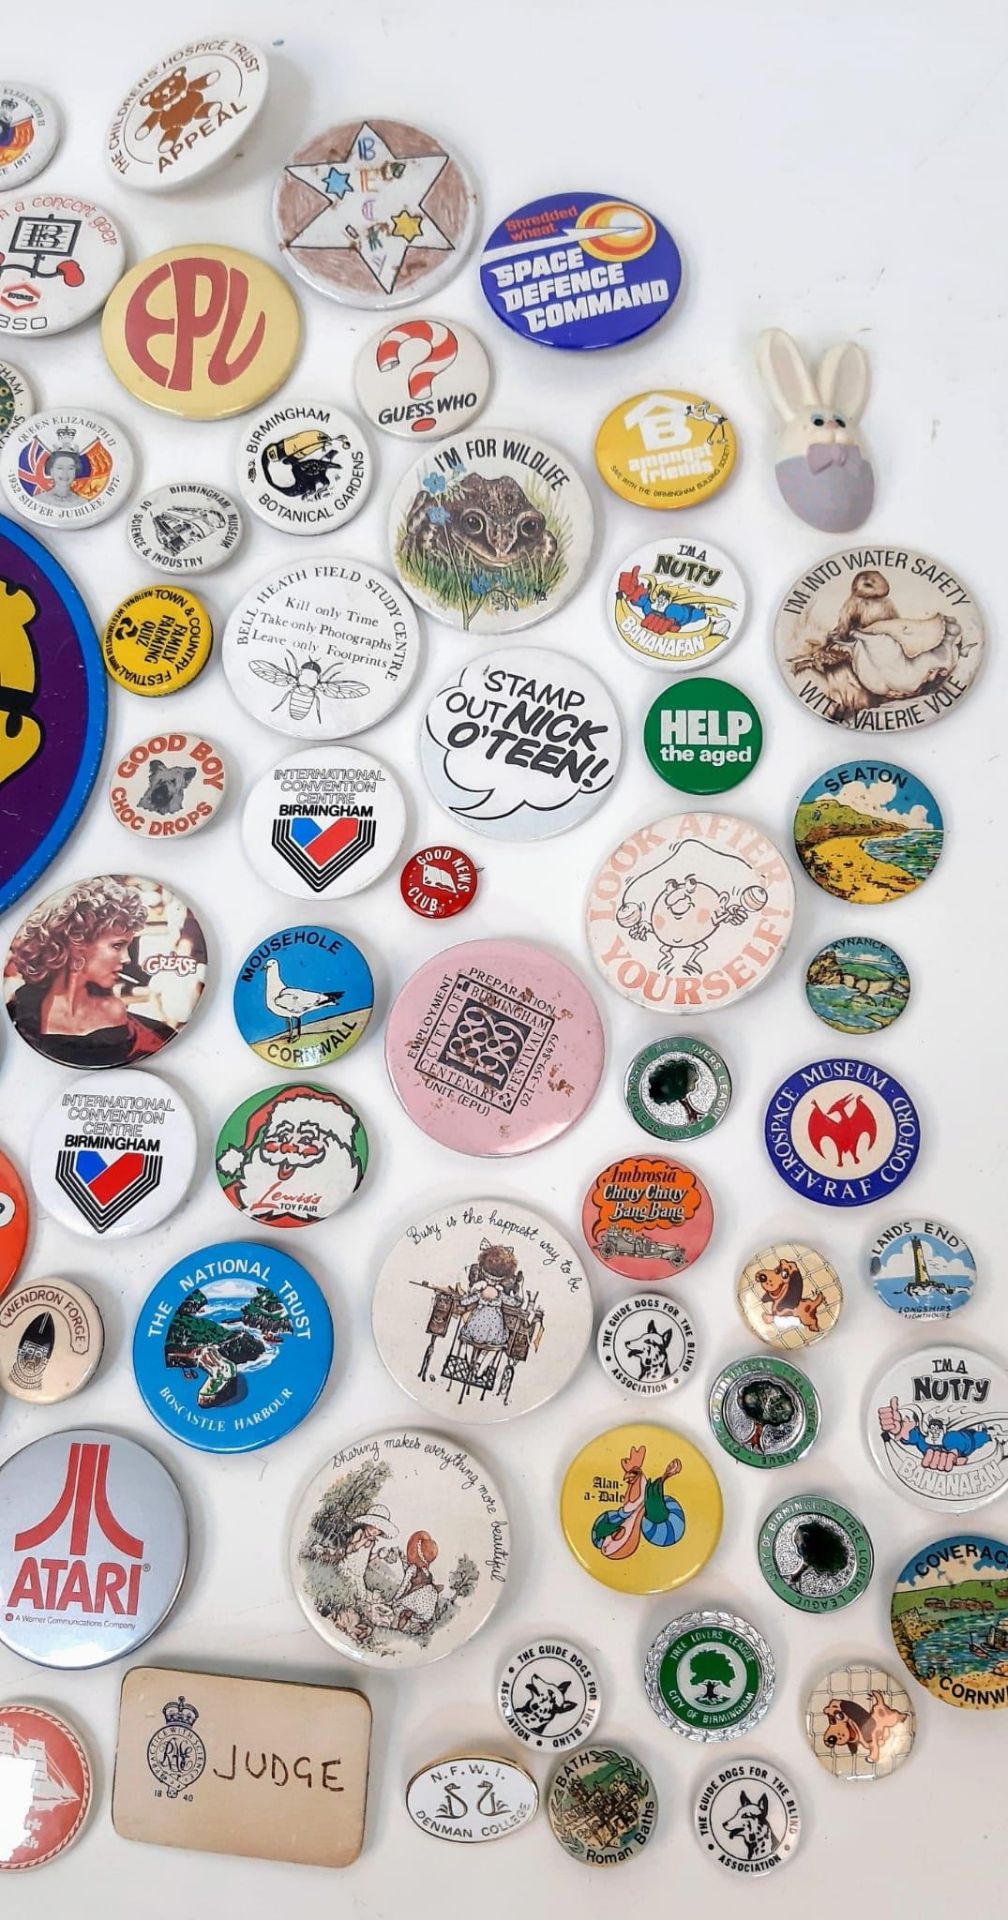 A Box of Vintage Pin Badges - Some absolute classics! - Image 4 of 8